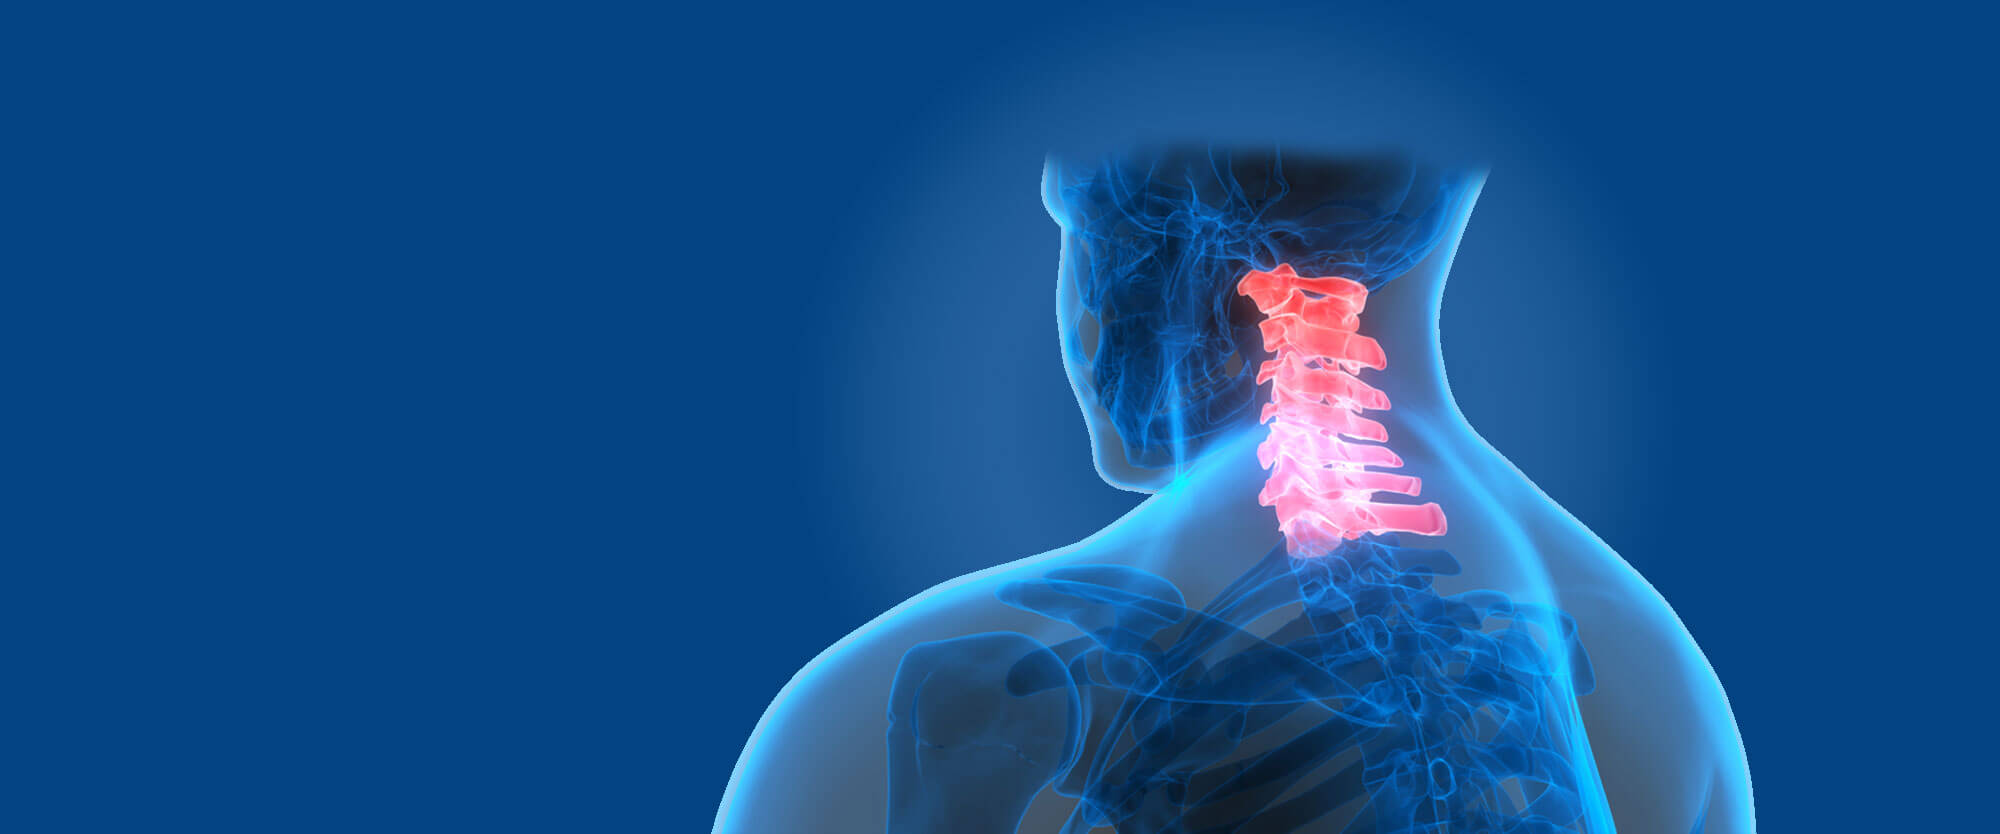 3D rendering of a man's neck bones with the vertebra highlighted in pink